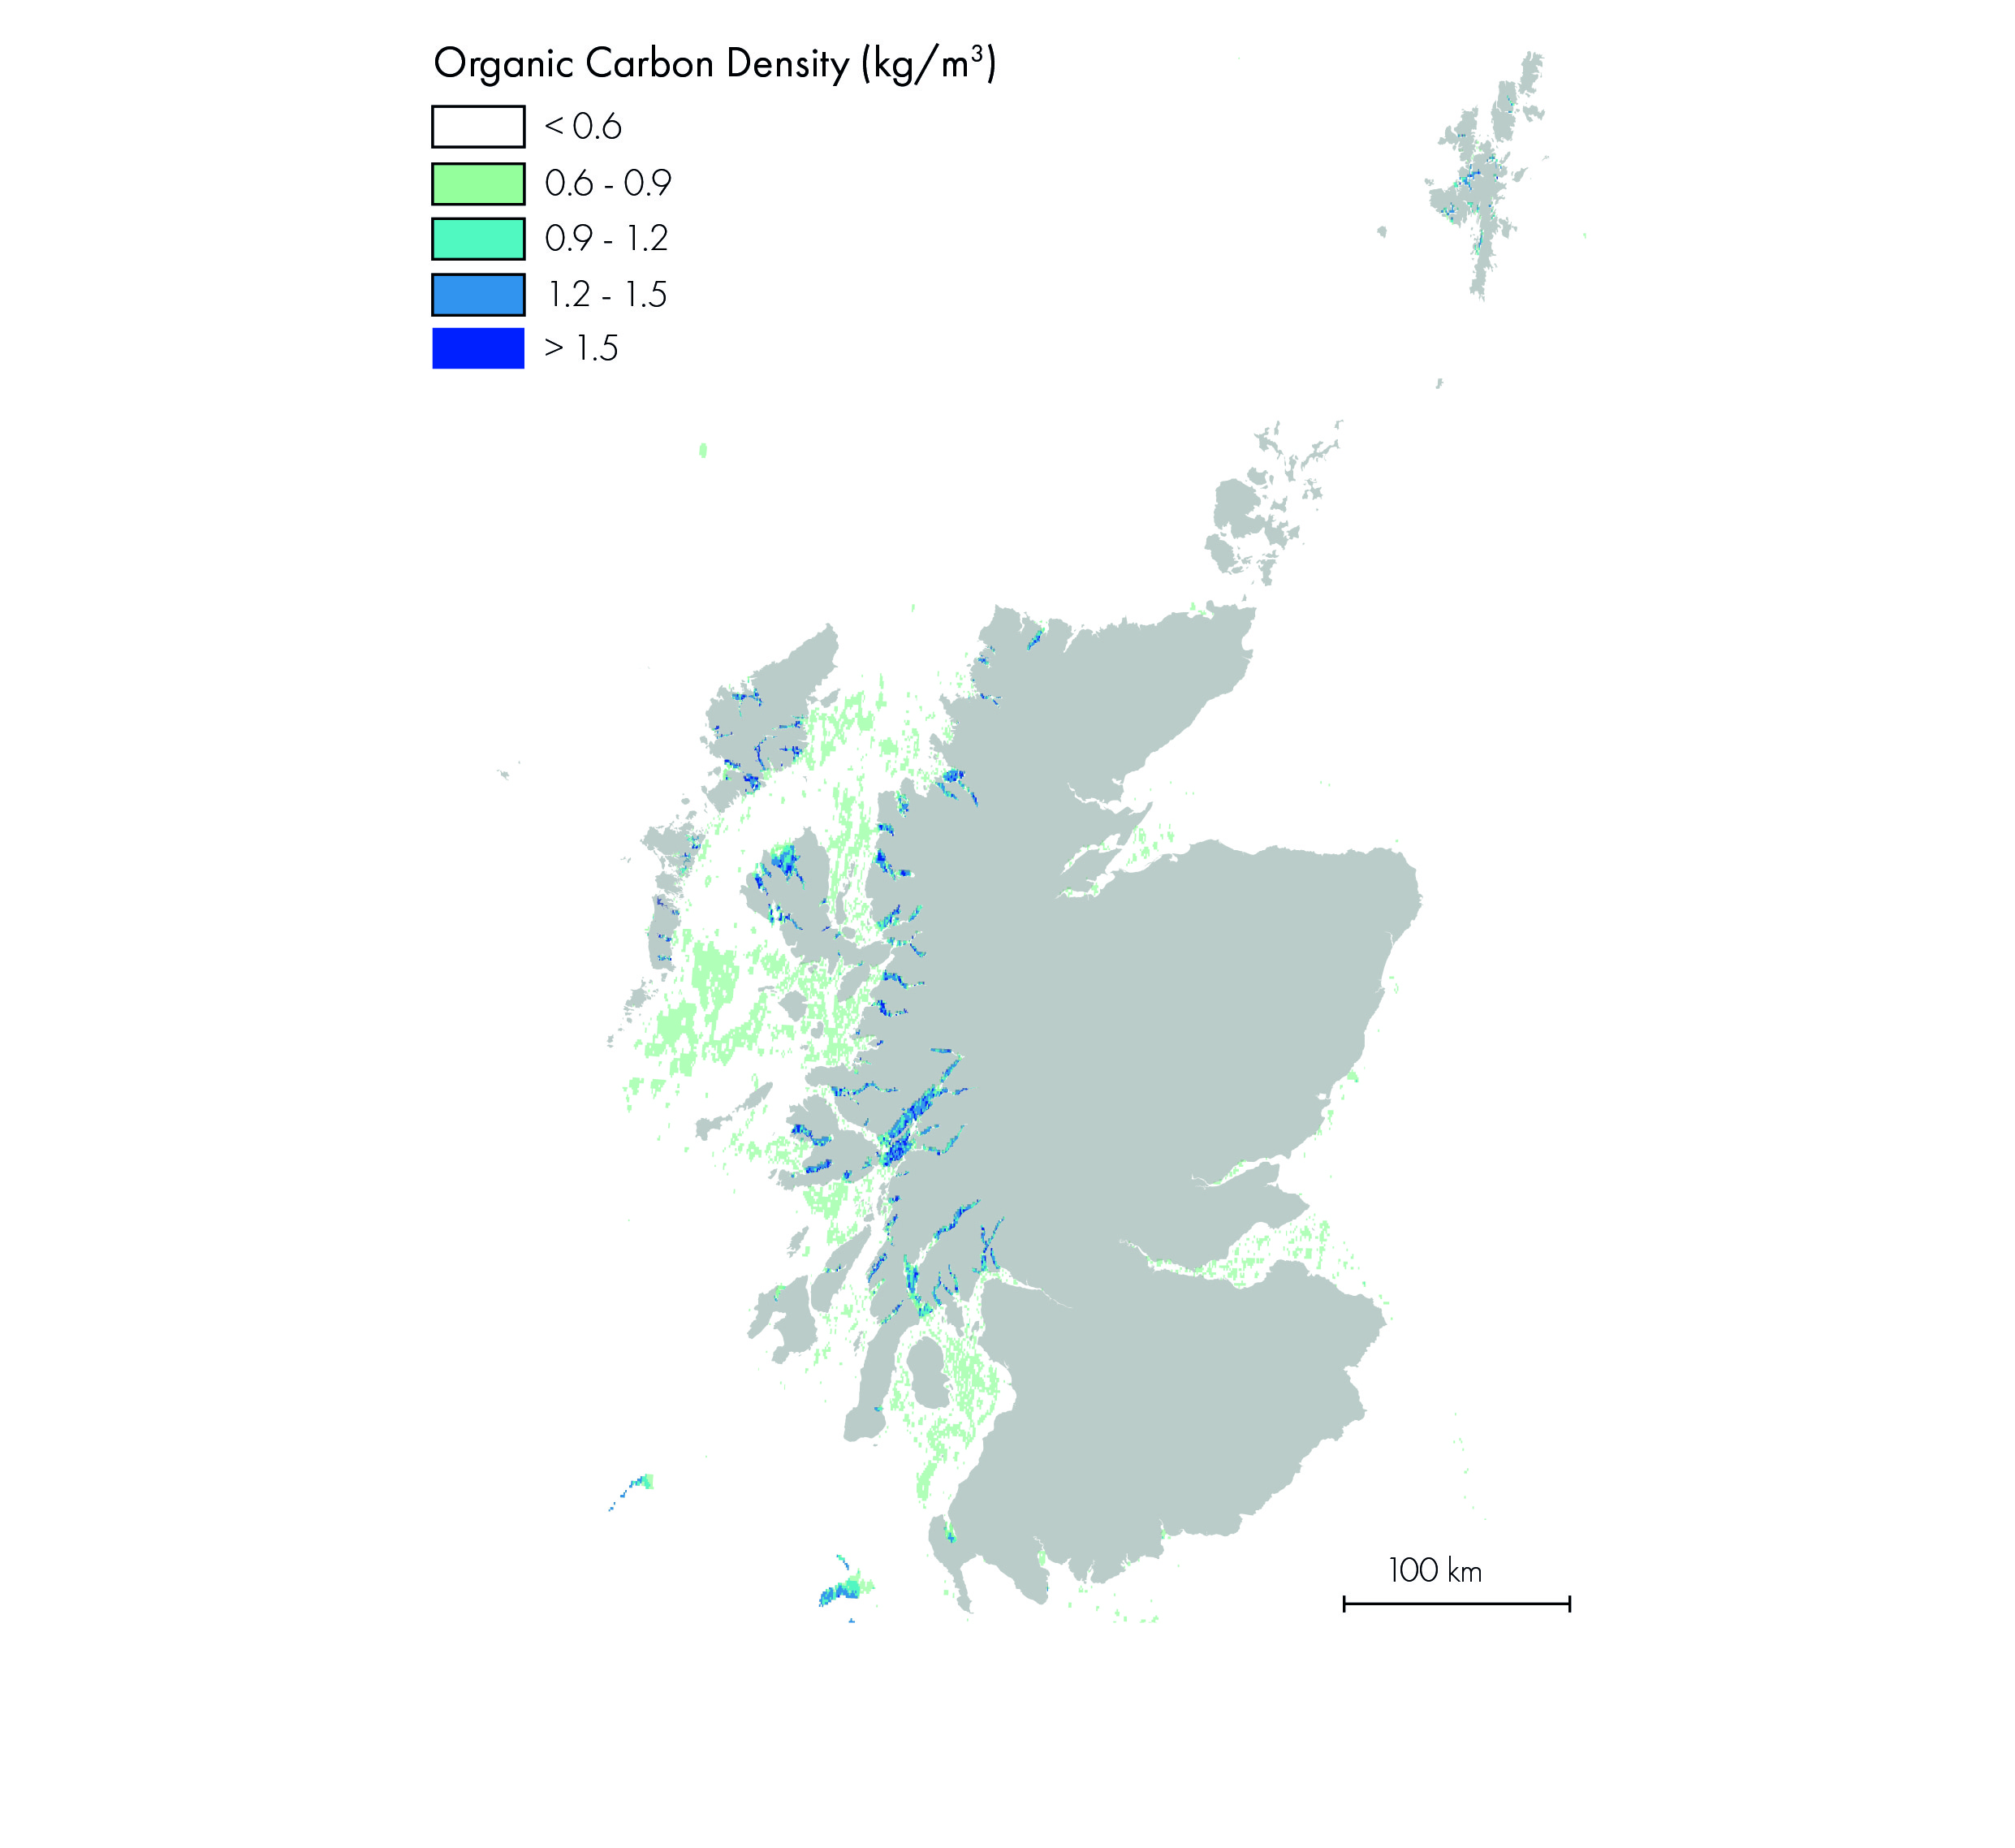 Map of Scotland and Scotland's seas showing the density distribution of organic carbon, with greatest densities (greater than 0.9 kg per cubic metre organic carbon) shown in the inshore regions of the western coast.